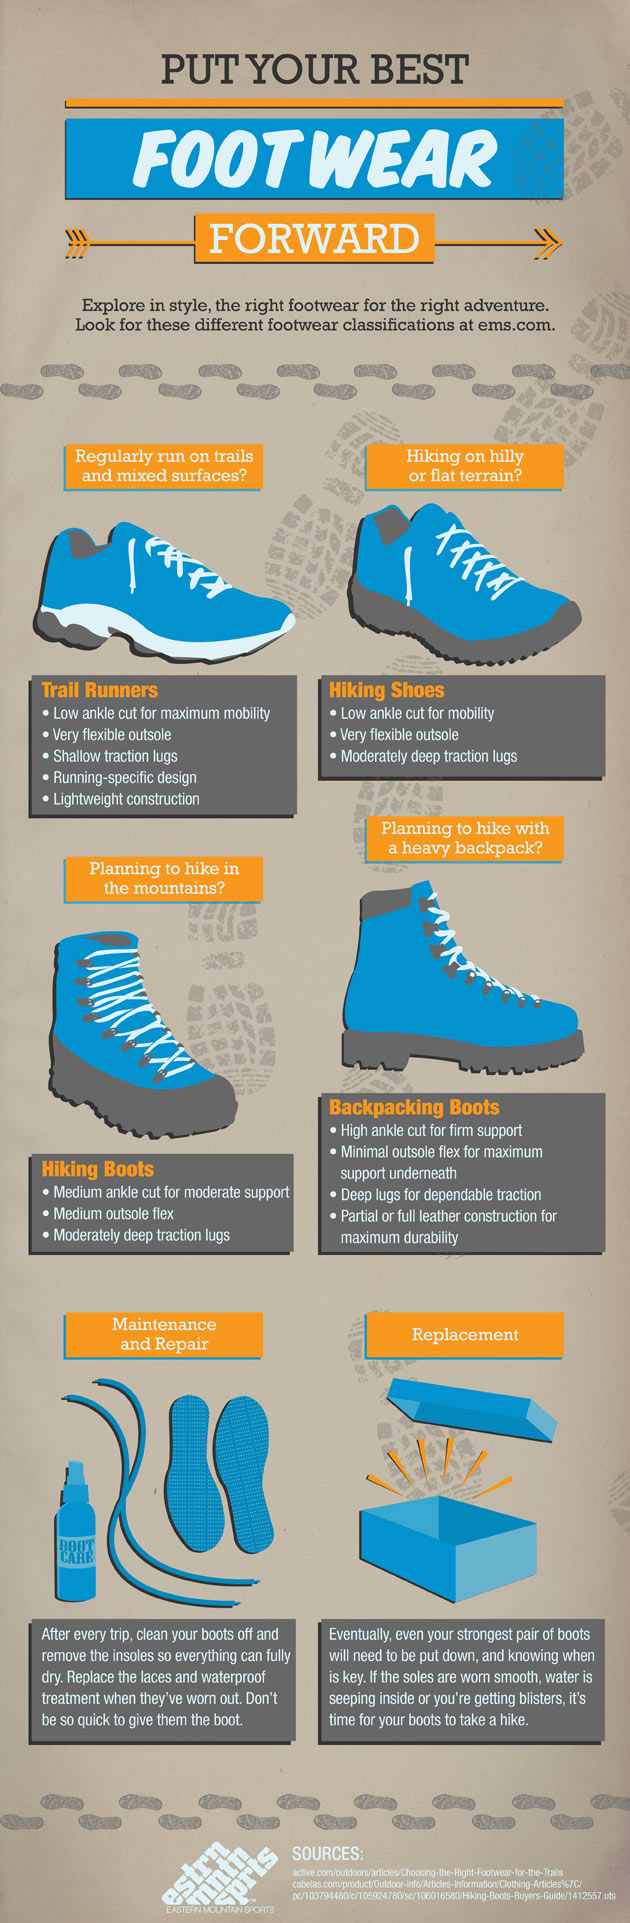 Finding the Right Footwear Style